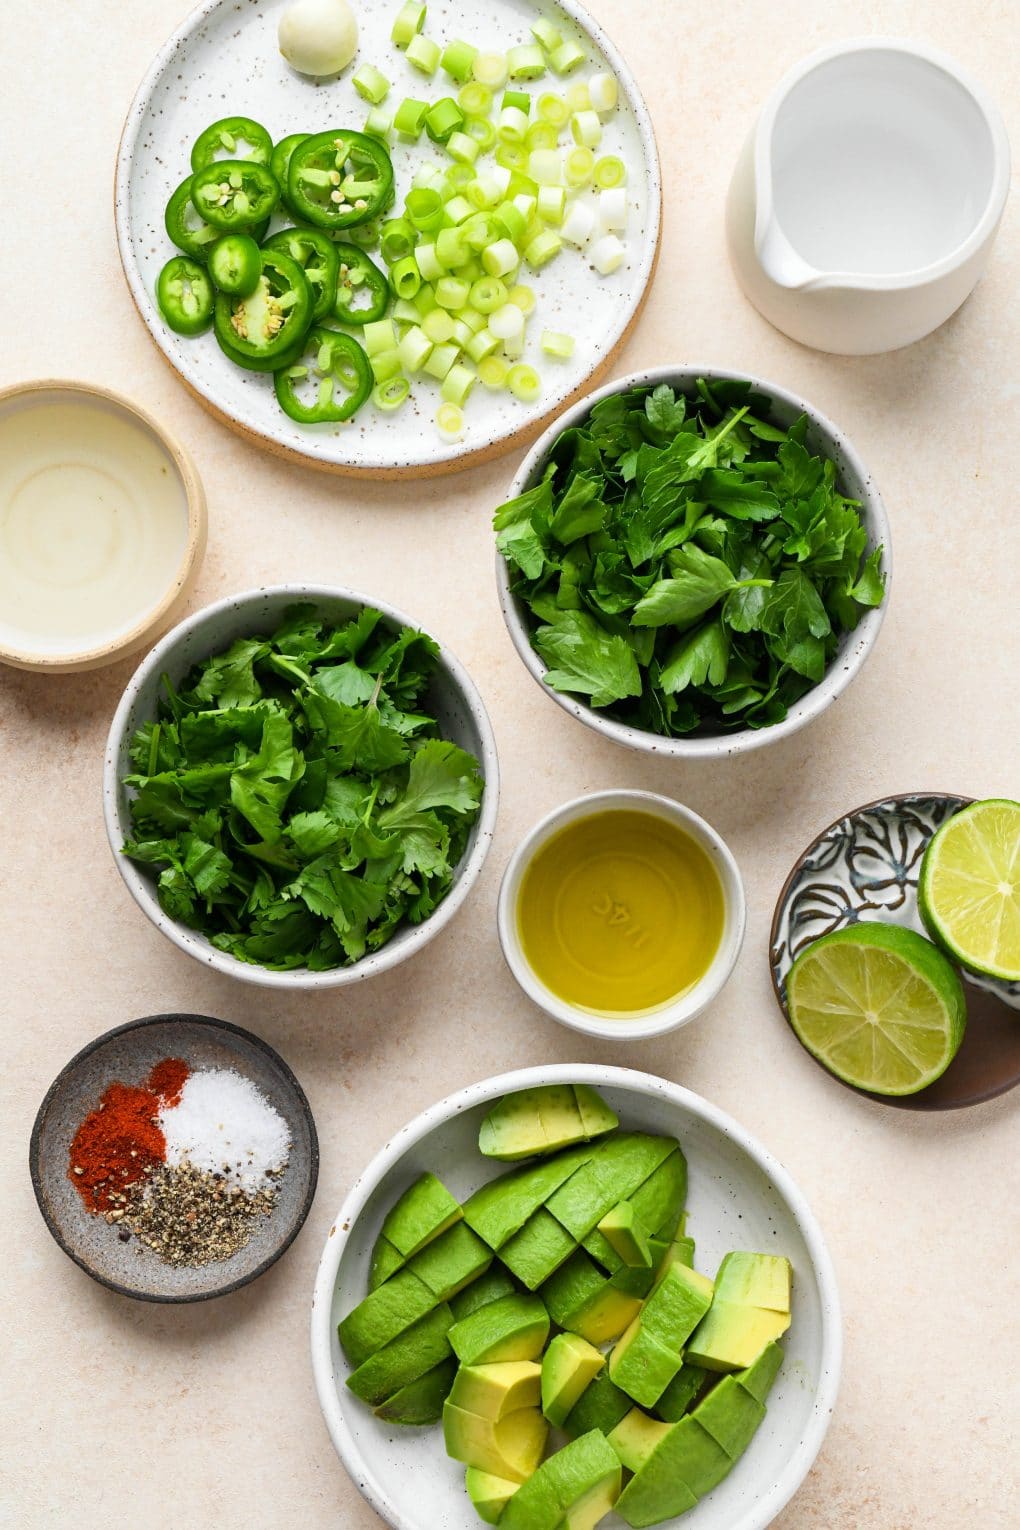 Ingredients for Avocado Herb Green Sauce in various ceramics, on a light cream colored background.